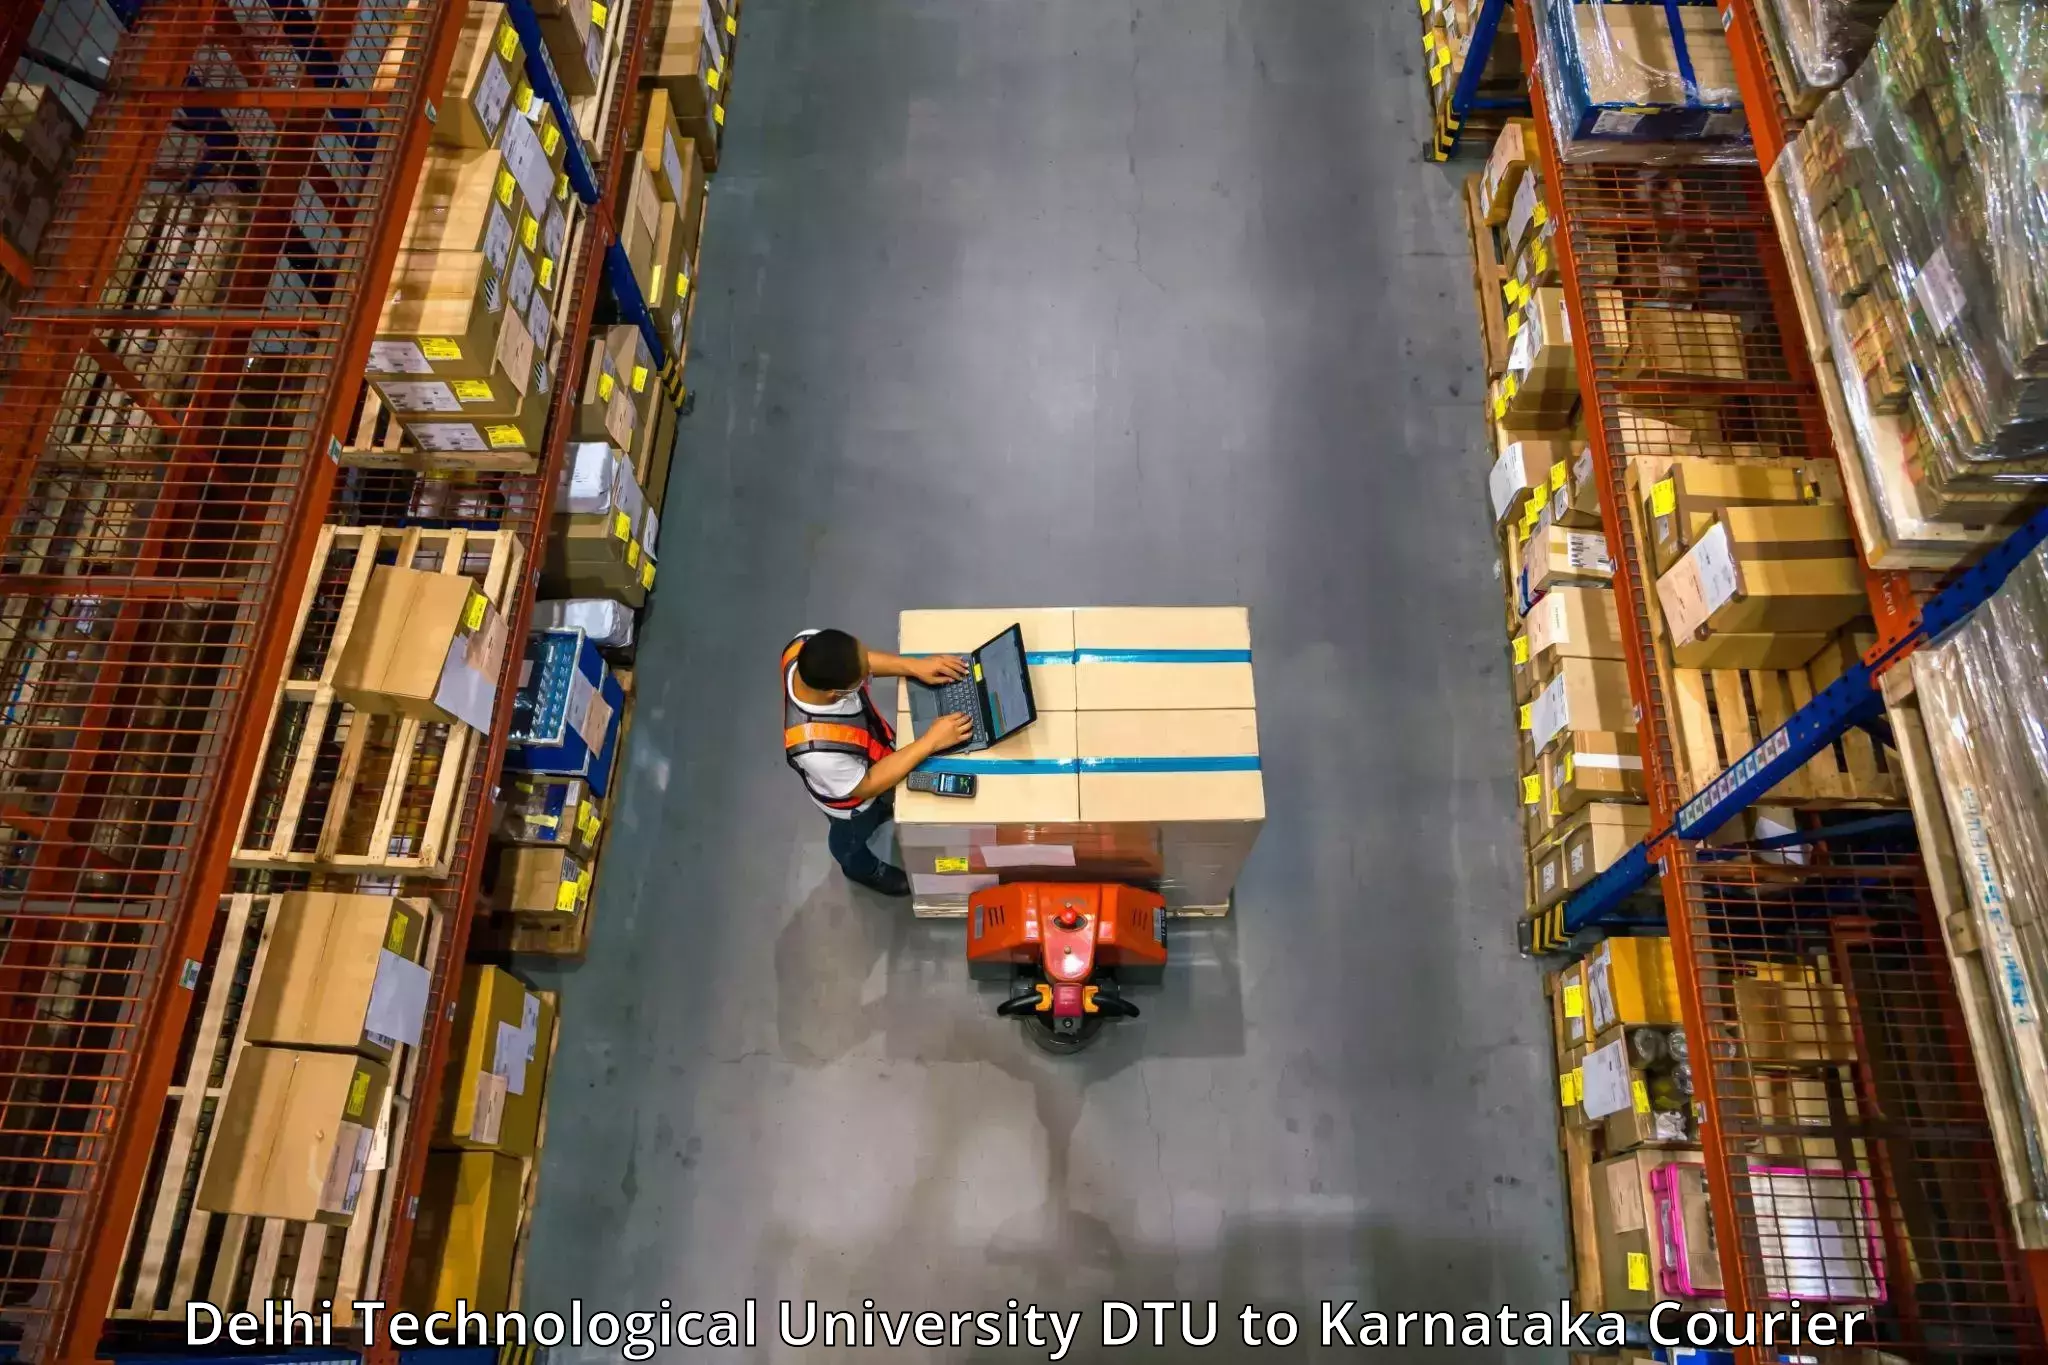 Furniture moving solutions Delhi Technological University DTU to IIT Dharwad